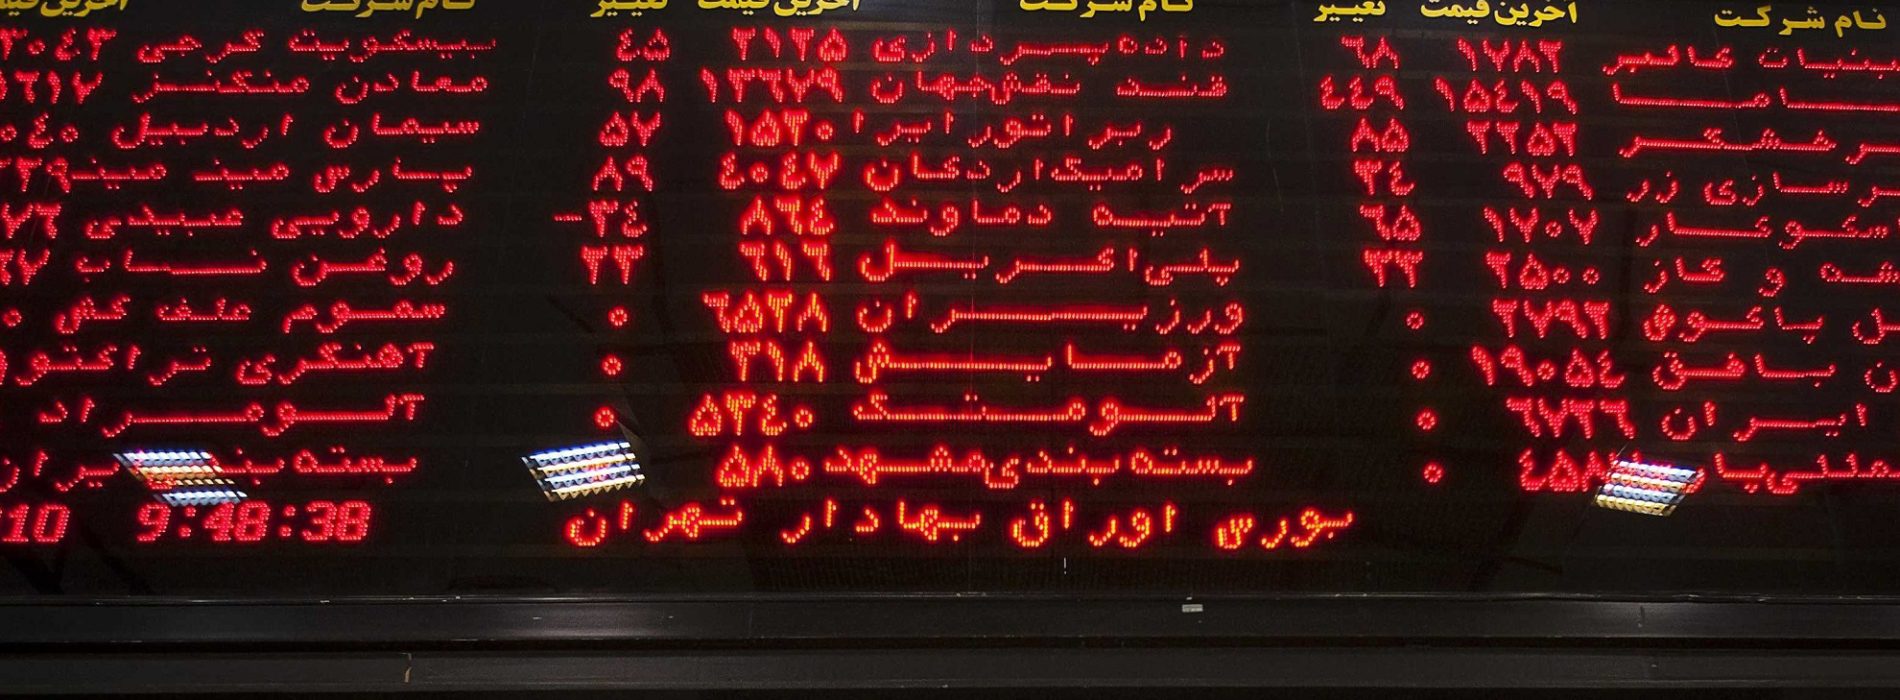 Germans Top Among Foreign Investors in Iranian Securities